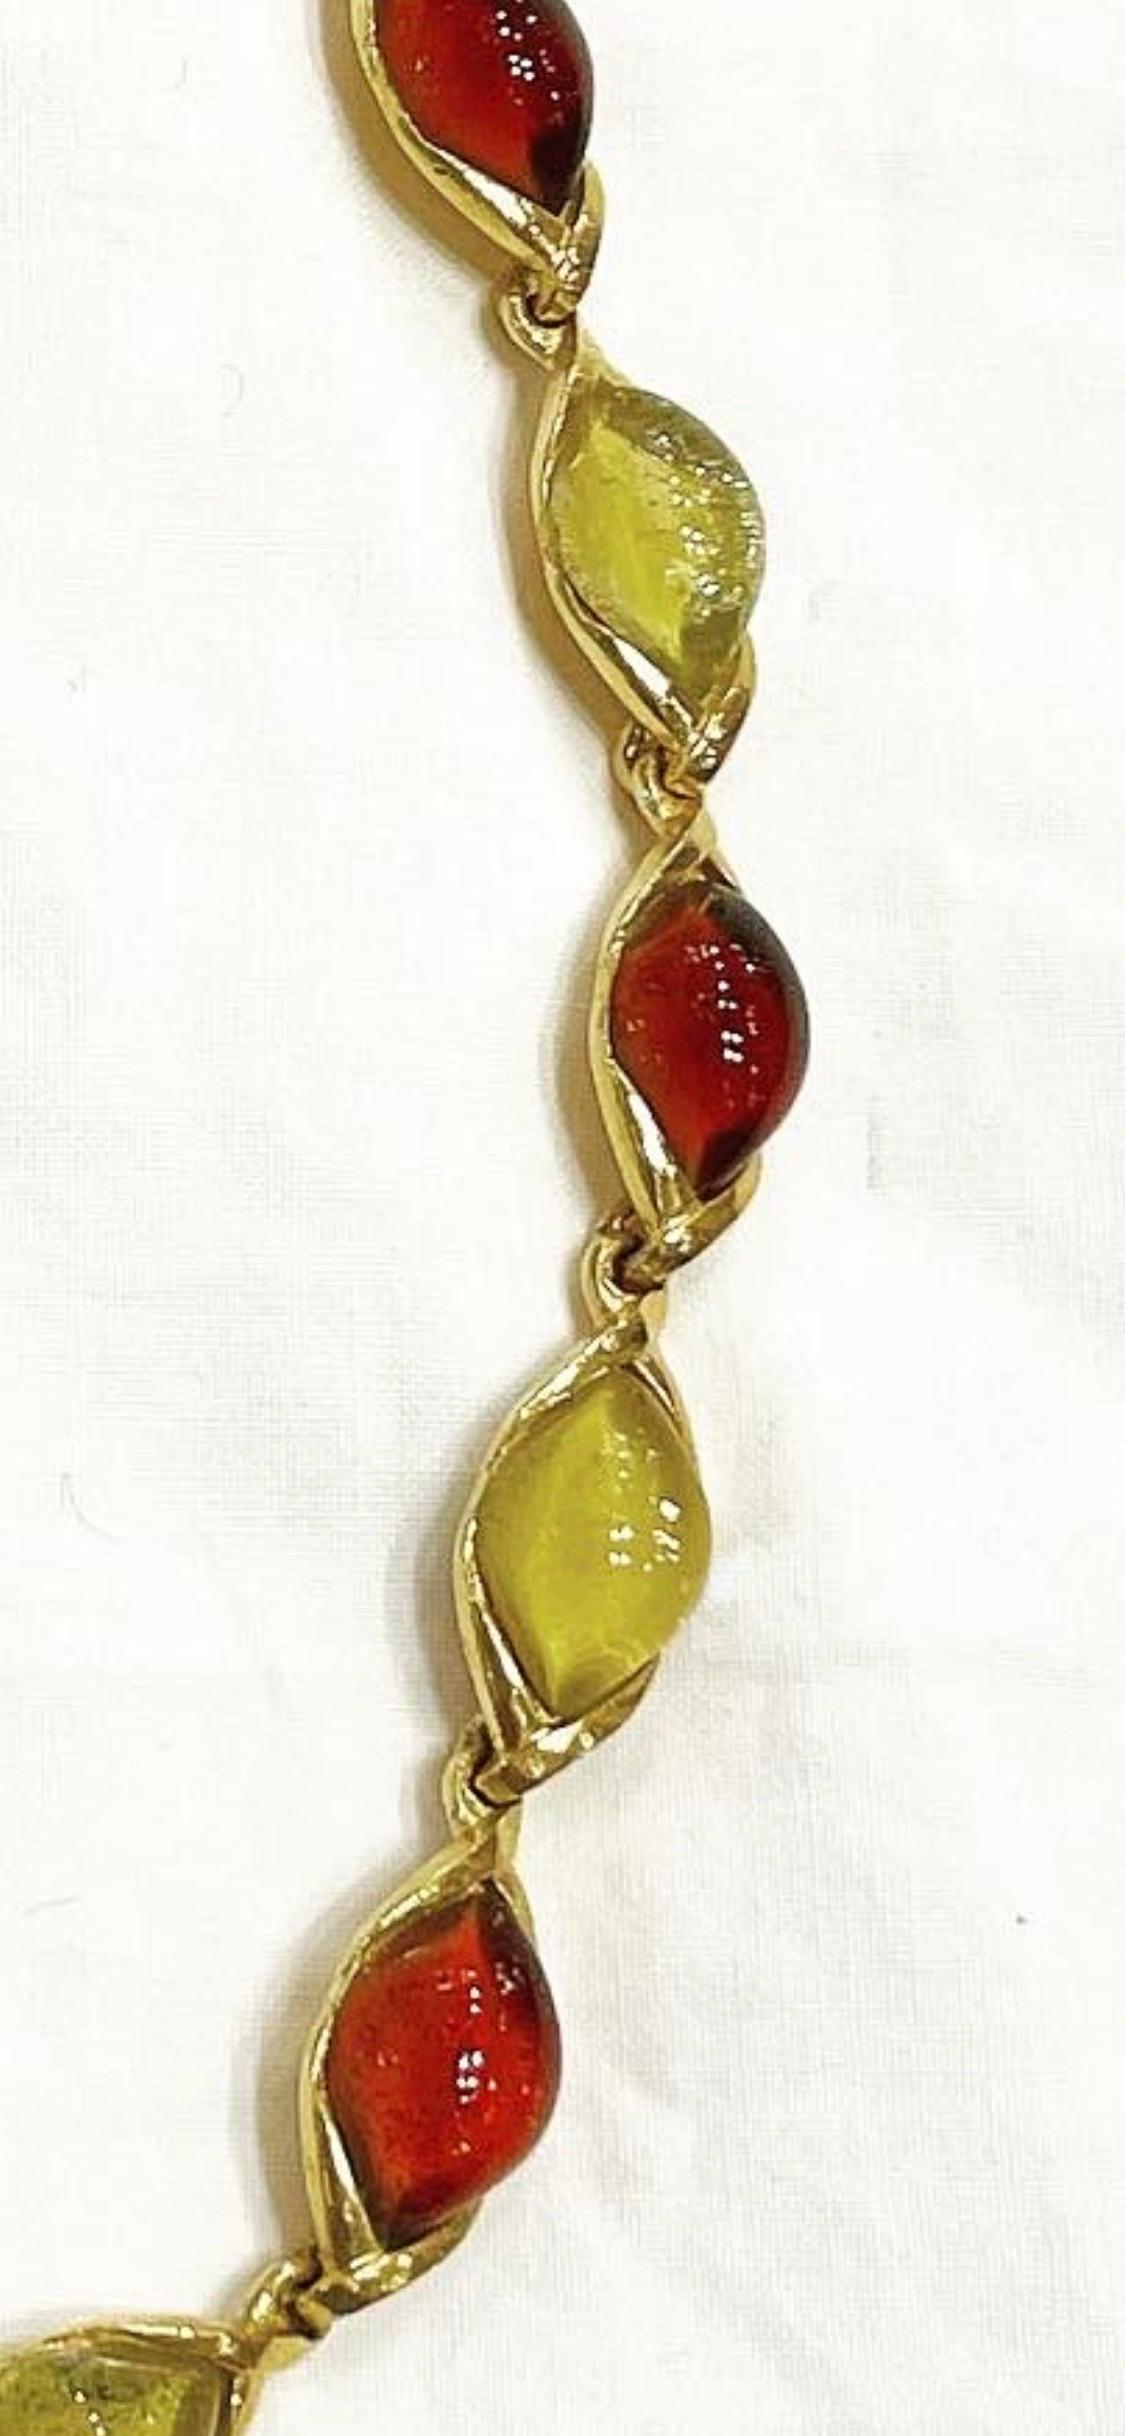 1980s gorgeous vintage YVES SAINT LAURENT oval shape amber and honey coloured glass choker necklace! 
Gilt chain with the YSL logo. 
Can really add just that little extra elegance to any outfit! 
Great with jeans, and perfect with a dress.
You can